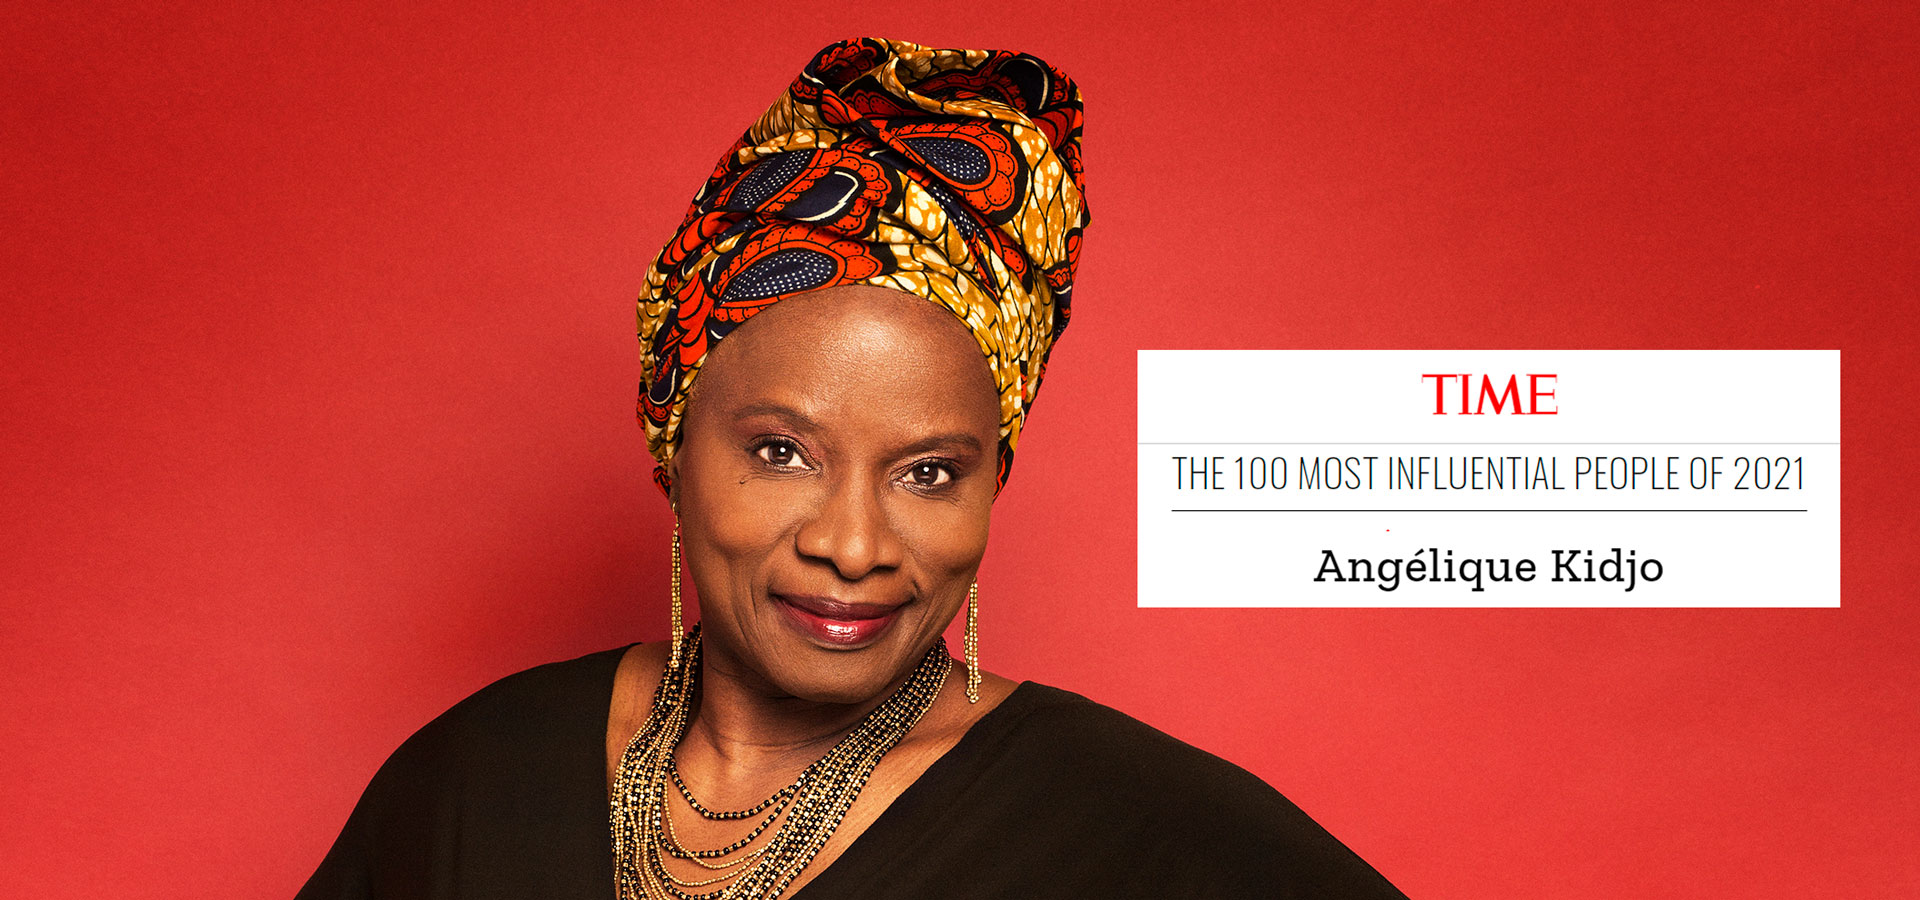 Angélique Kidjo Time Most Influential Person of 2021